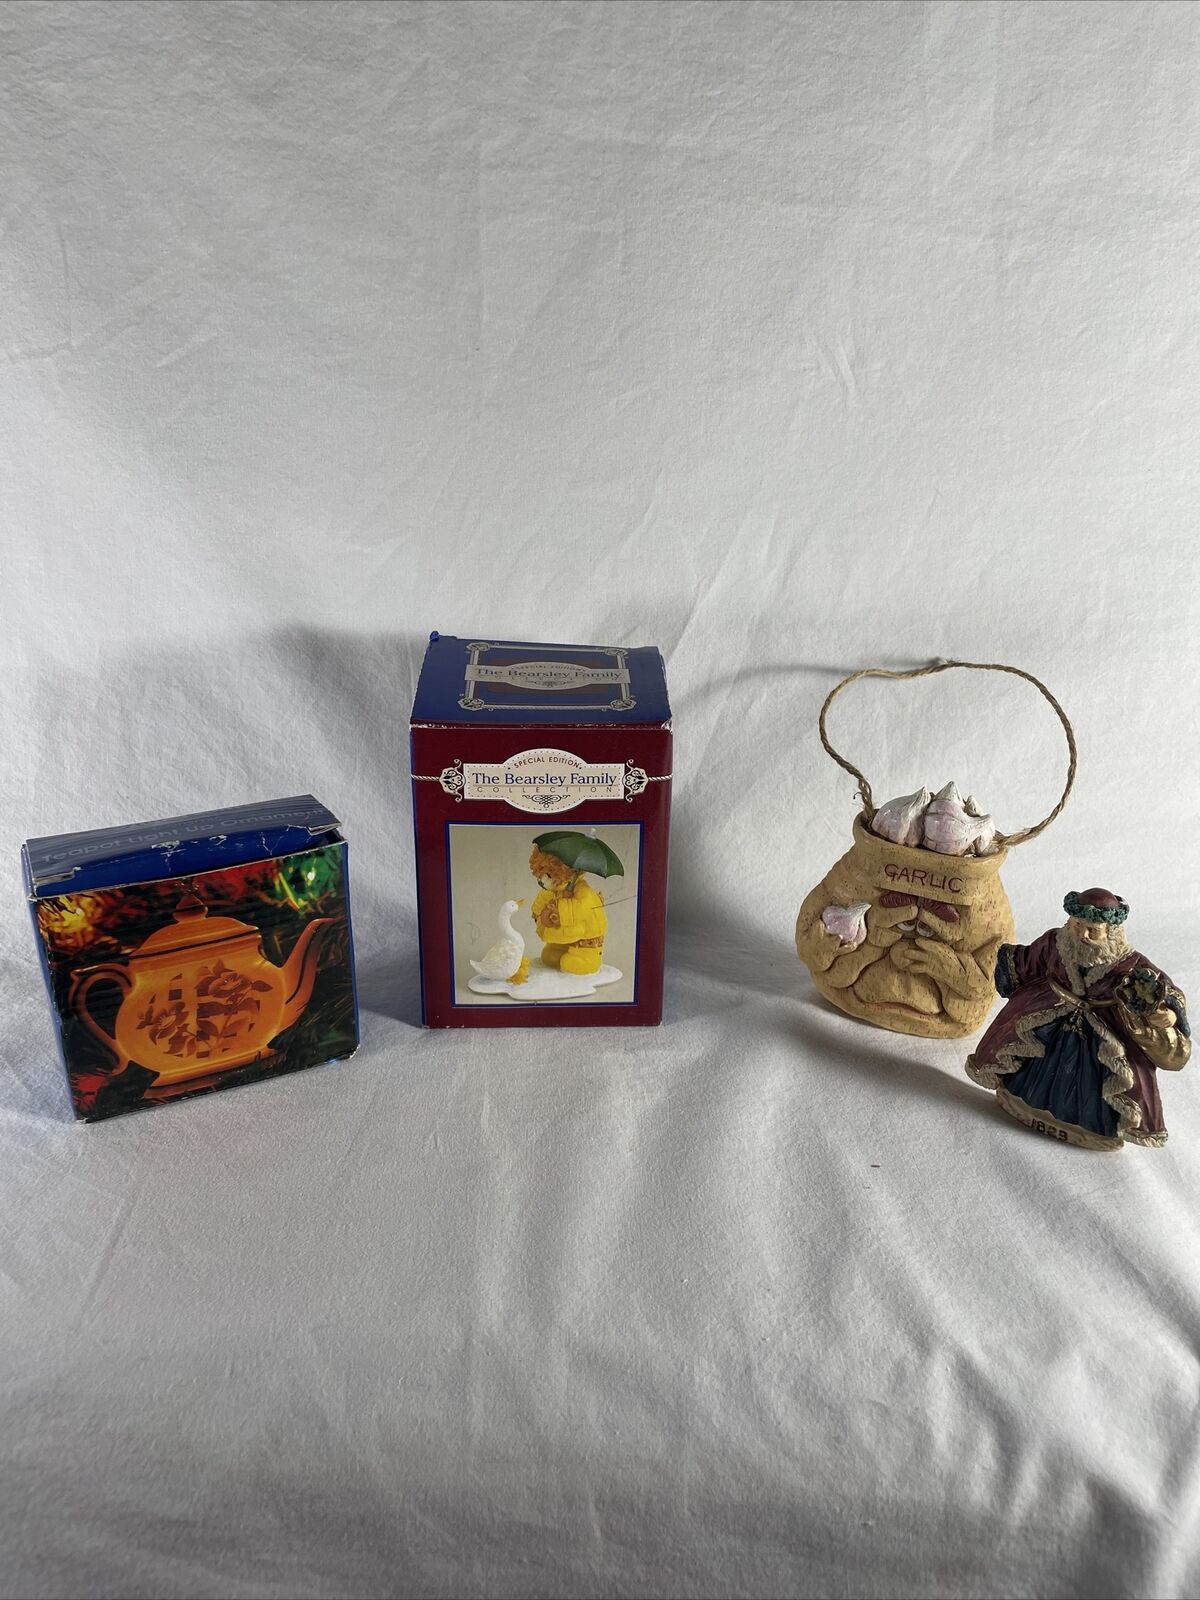 Lot of Vintage Ornament, House of Lloyd Mag, The Bearsley Family, Garlic, Teapot